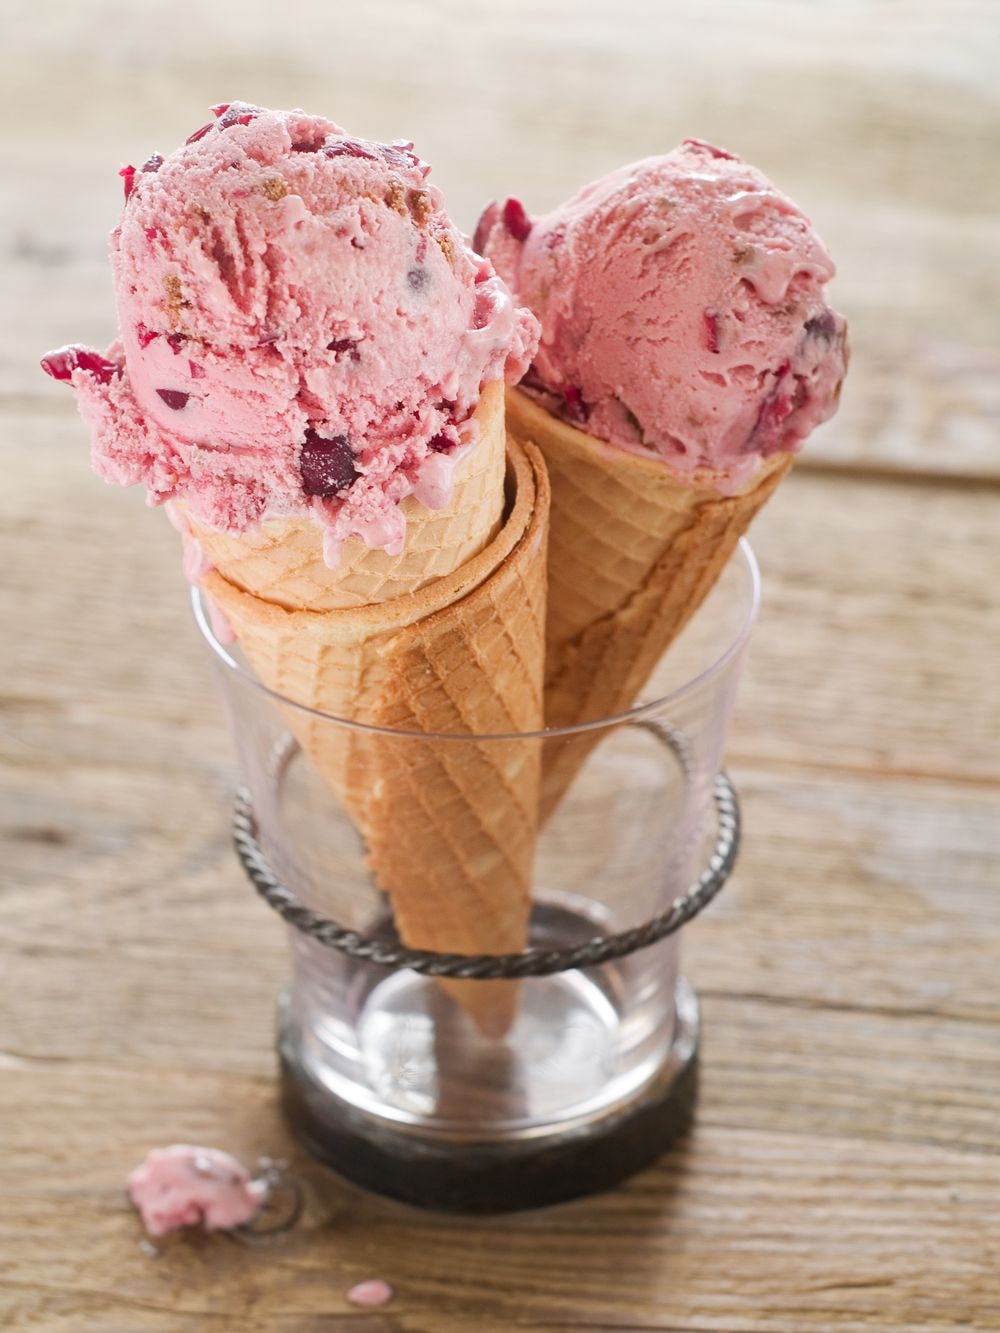 Homemade scoops of ice cream made with cranberries in cones.